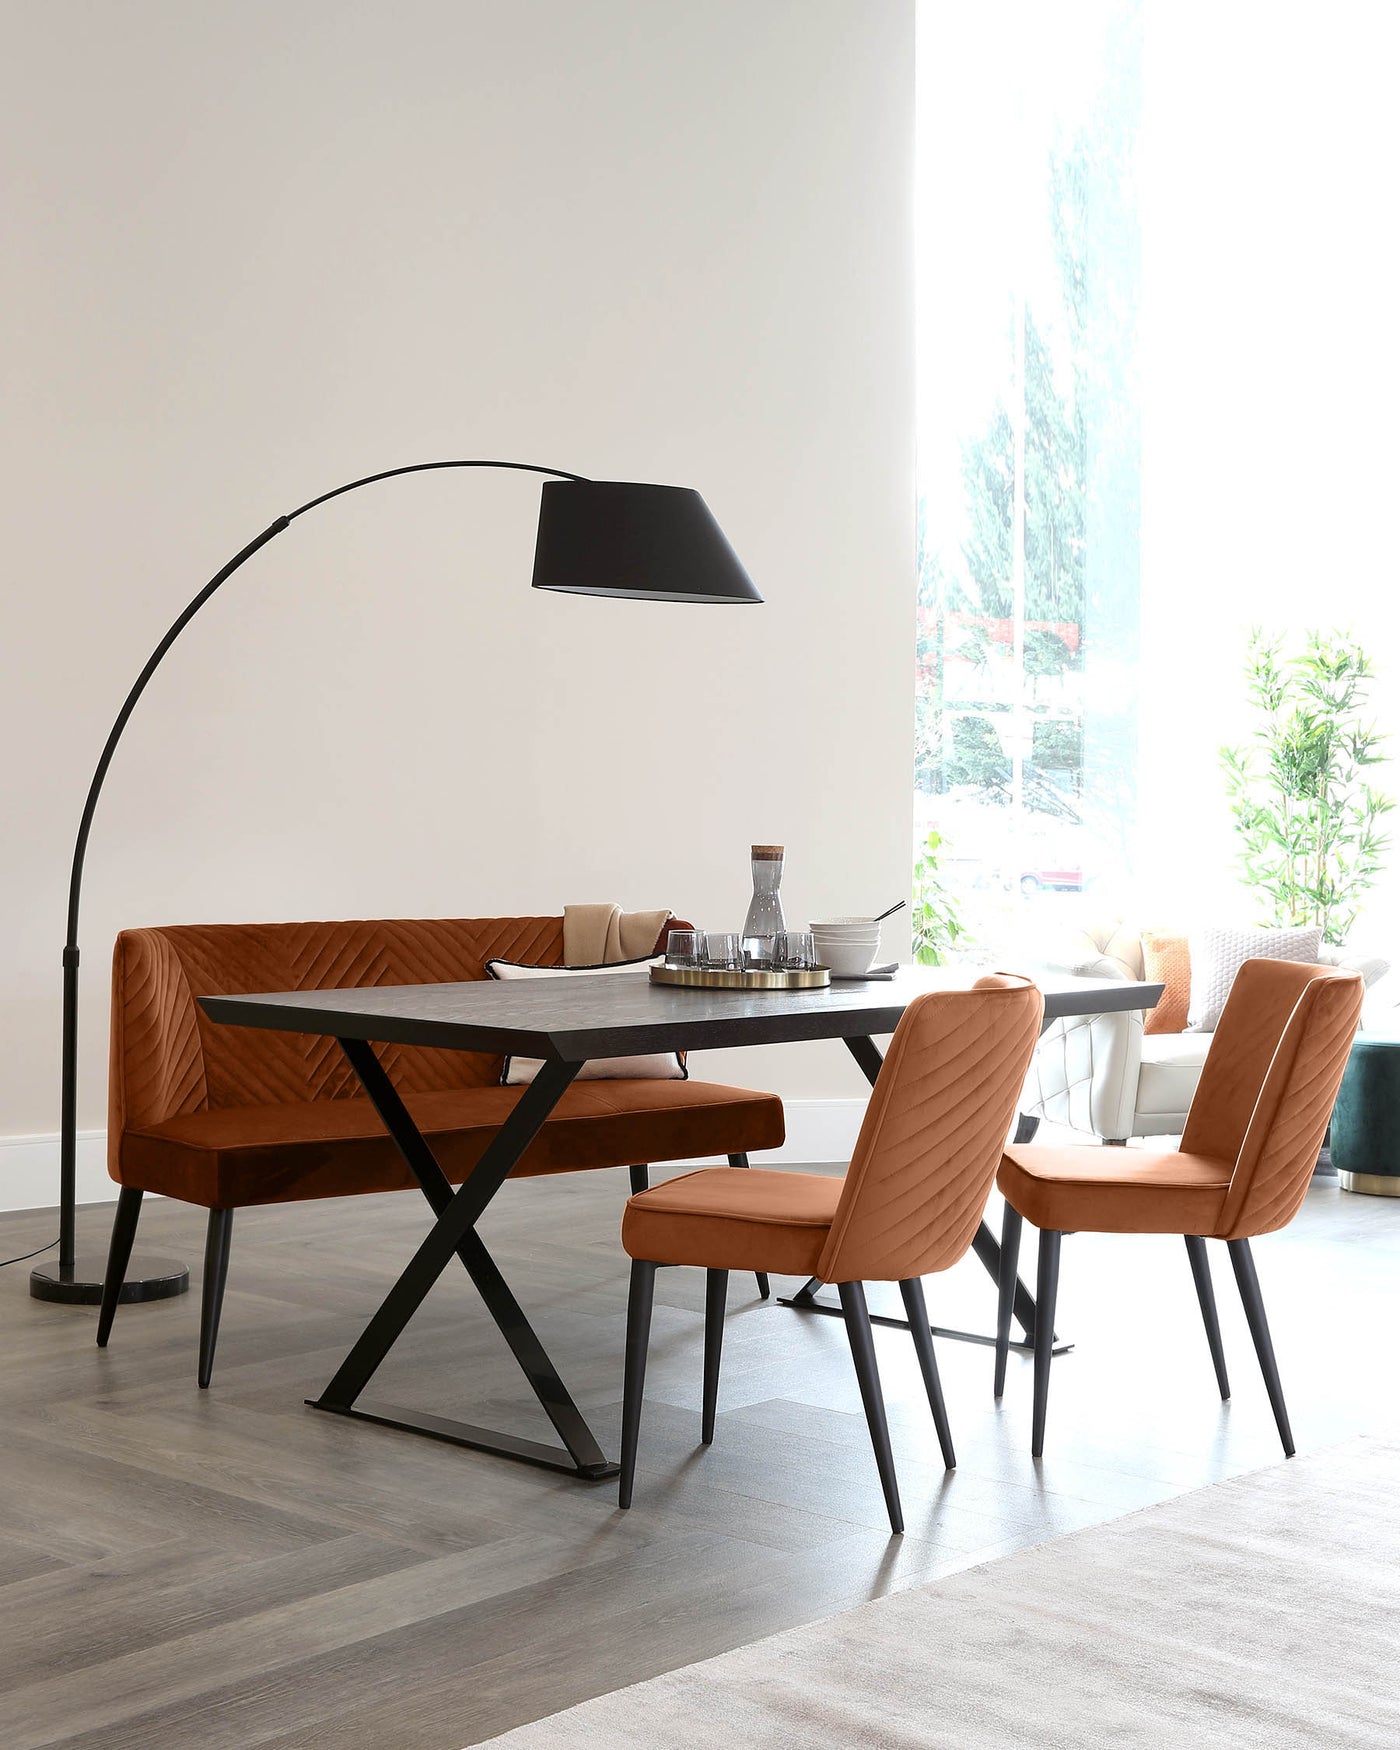 Modern dining room with a rectangular black table with X-shaped metal legs, four upholstered chairs in terracotta with black metal legs, and an elegant, curved black floor lamp with a large shade leaning over the table.